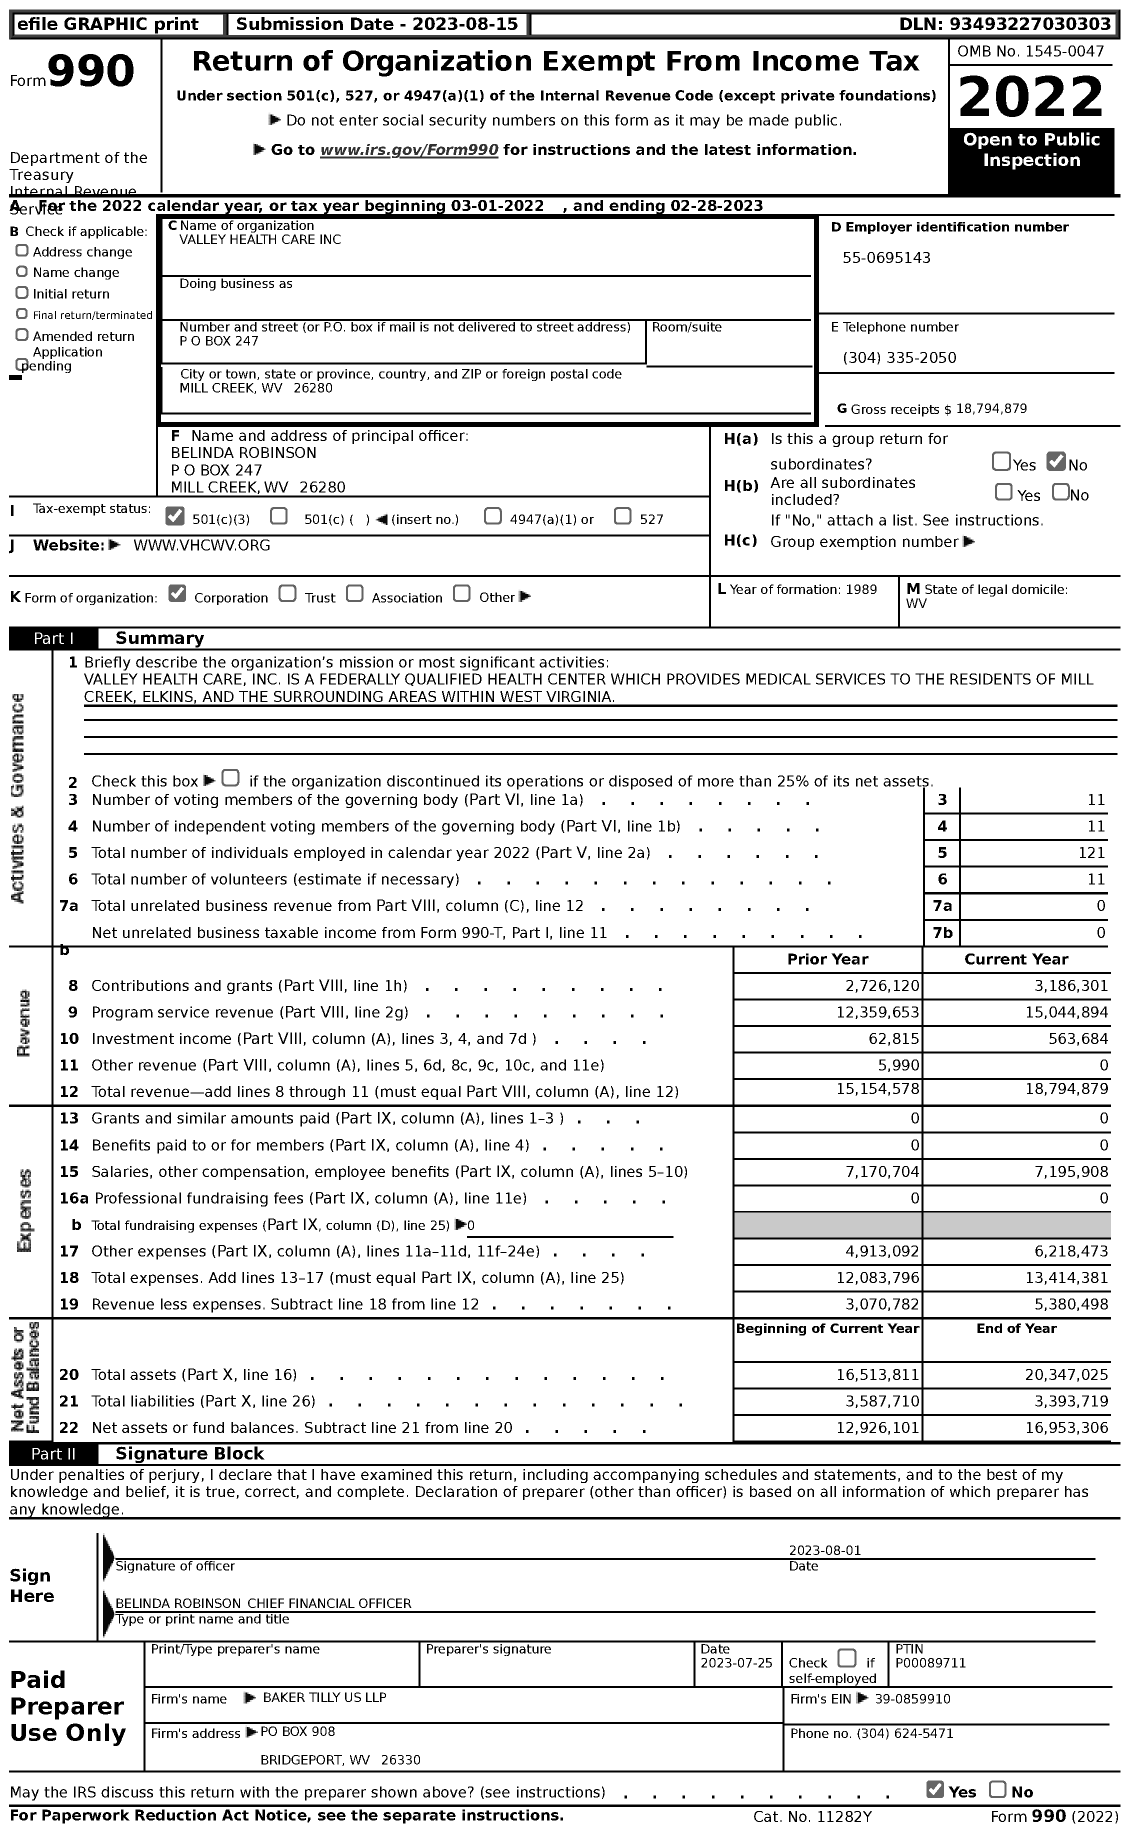 Image of first page of 2022 Form 990 for Valley Health Care (VHC)